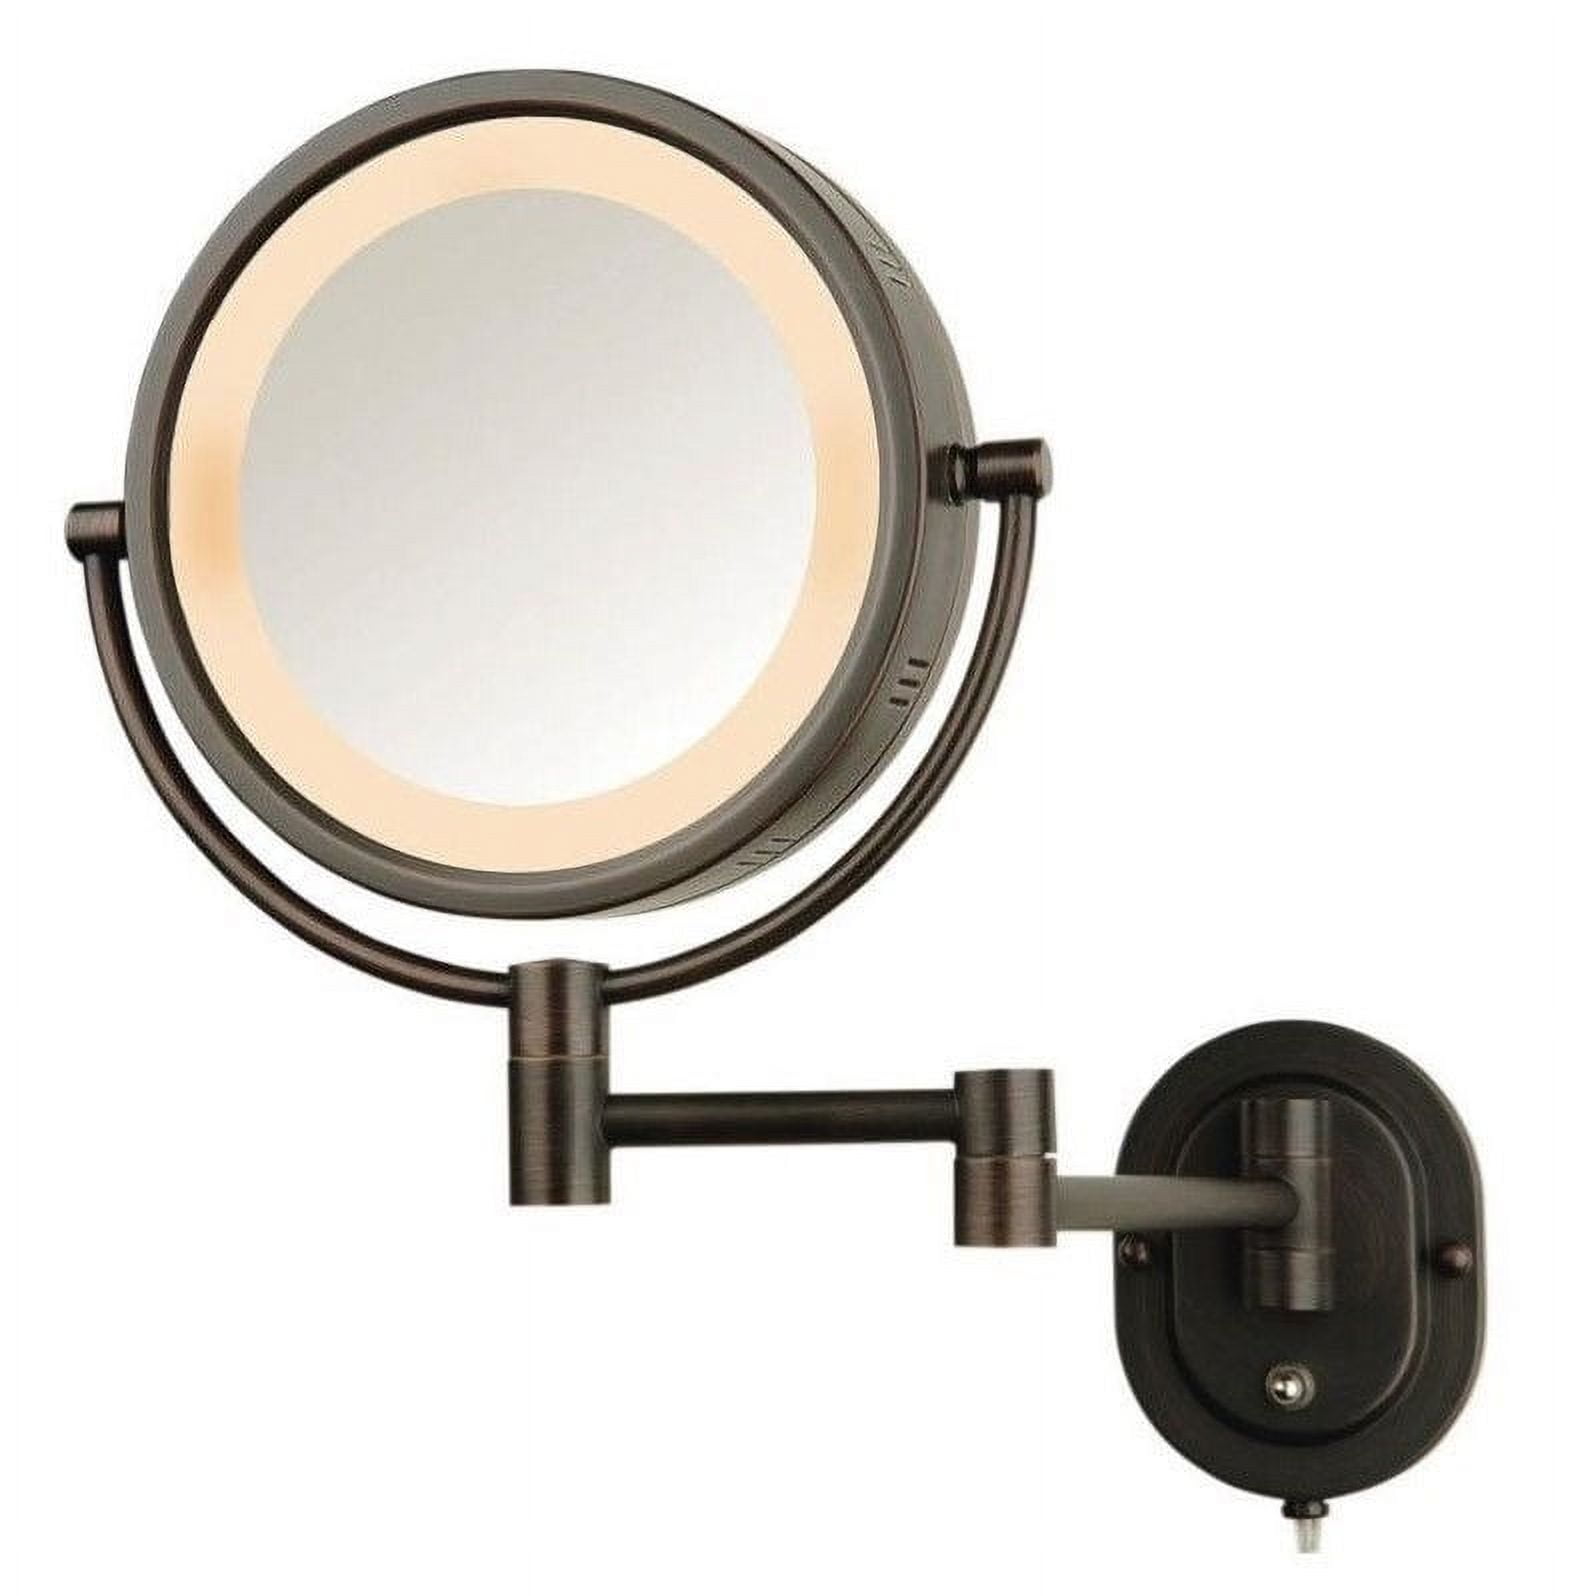 Jerdon HL65BZ 8-Inch Lighted Wall Mount Makeup Mirror with 5x Magnification,  Bronze Finish